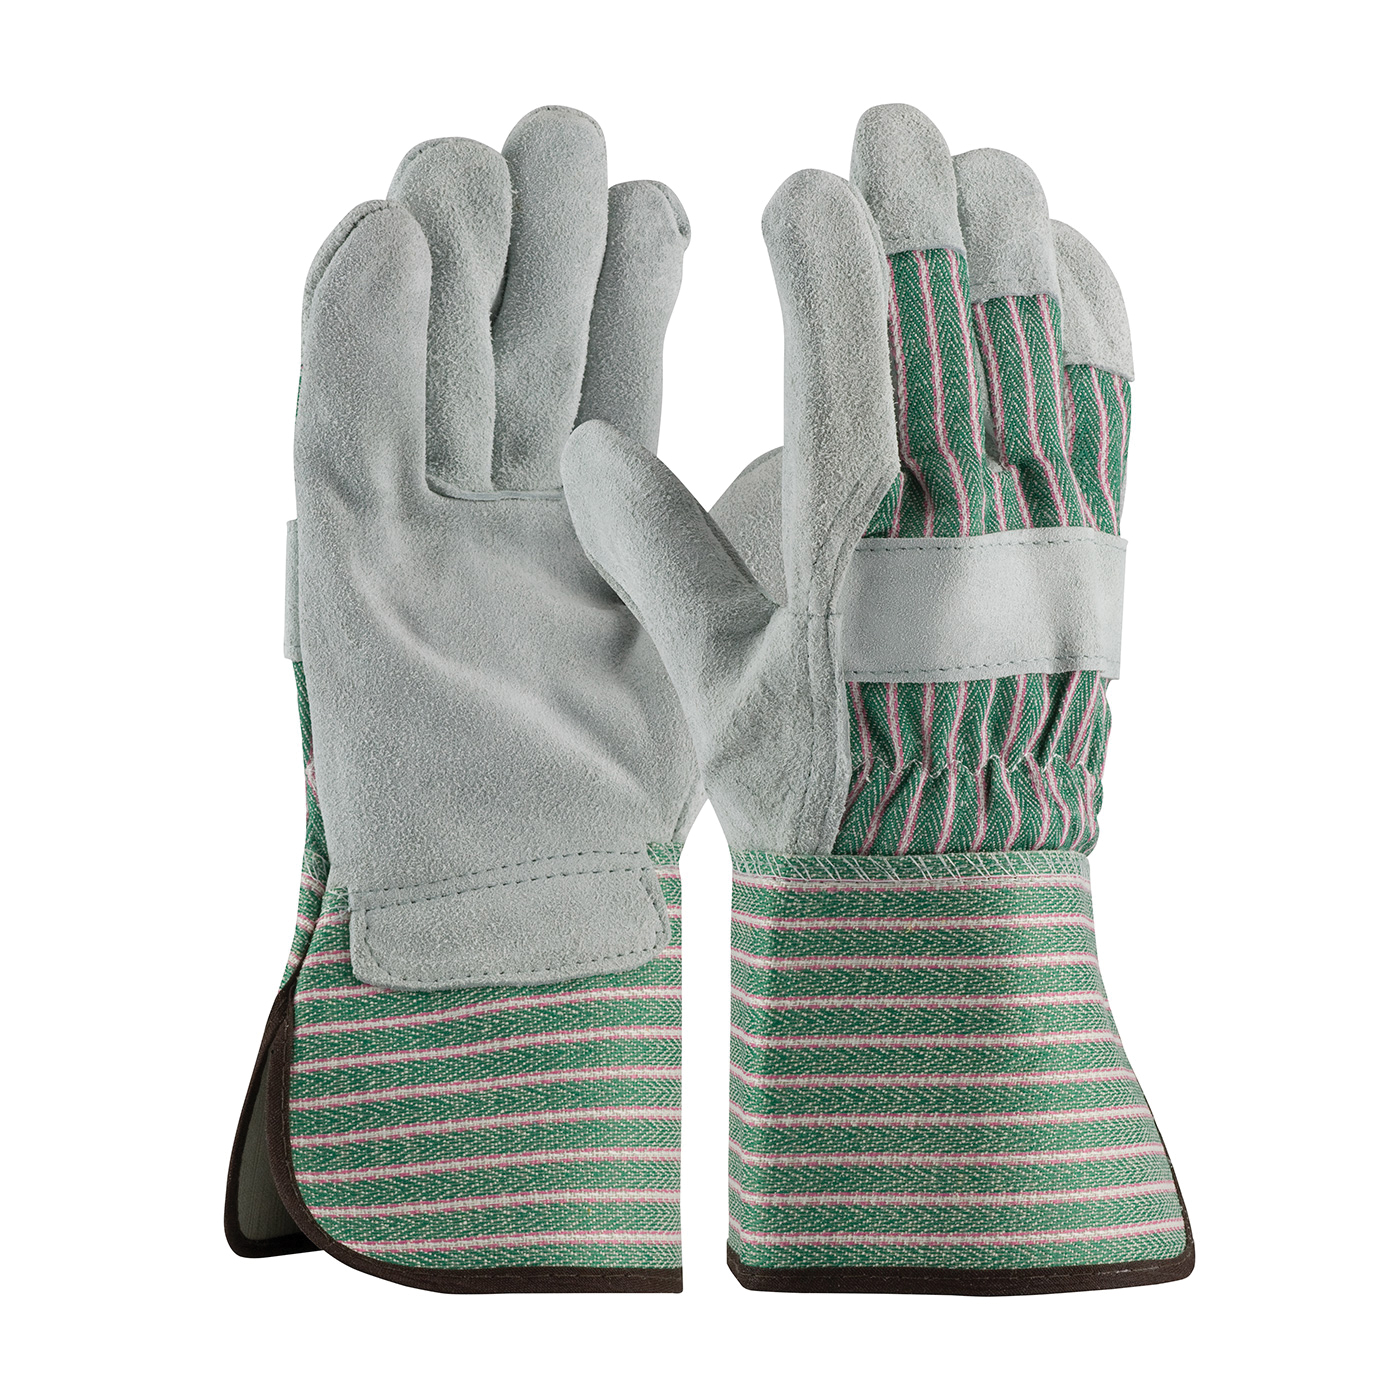 PIP® 83-6663/M Bronze 83-6663 B-Grade General Purpose Gloves, Leather Palm, Gunn Cut with Wing Thumb Style, M, Shoulder Split Cowhide Leather Palm, 75% Cowhide Leather/25% Cotton, Green/Gray/Pink, Gauntlet/Rubberized Cuff, Uncoated Coating, Cotton Lining